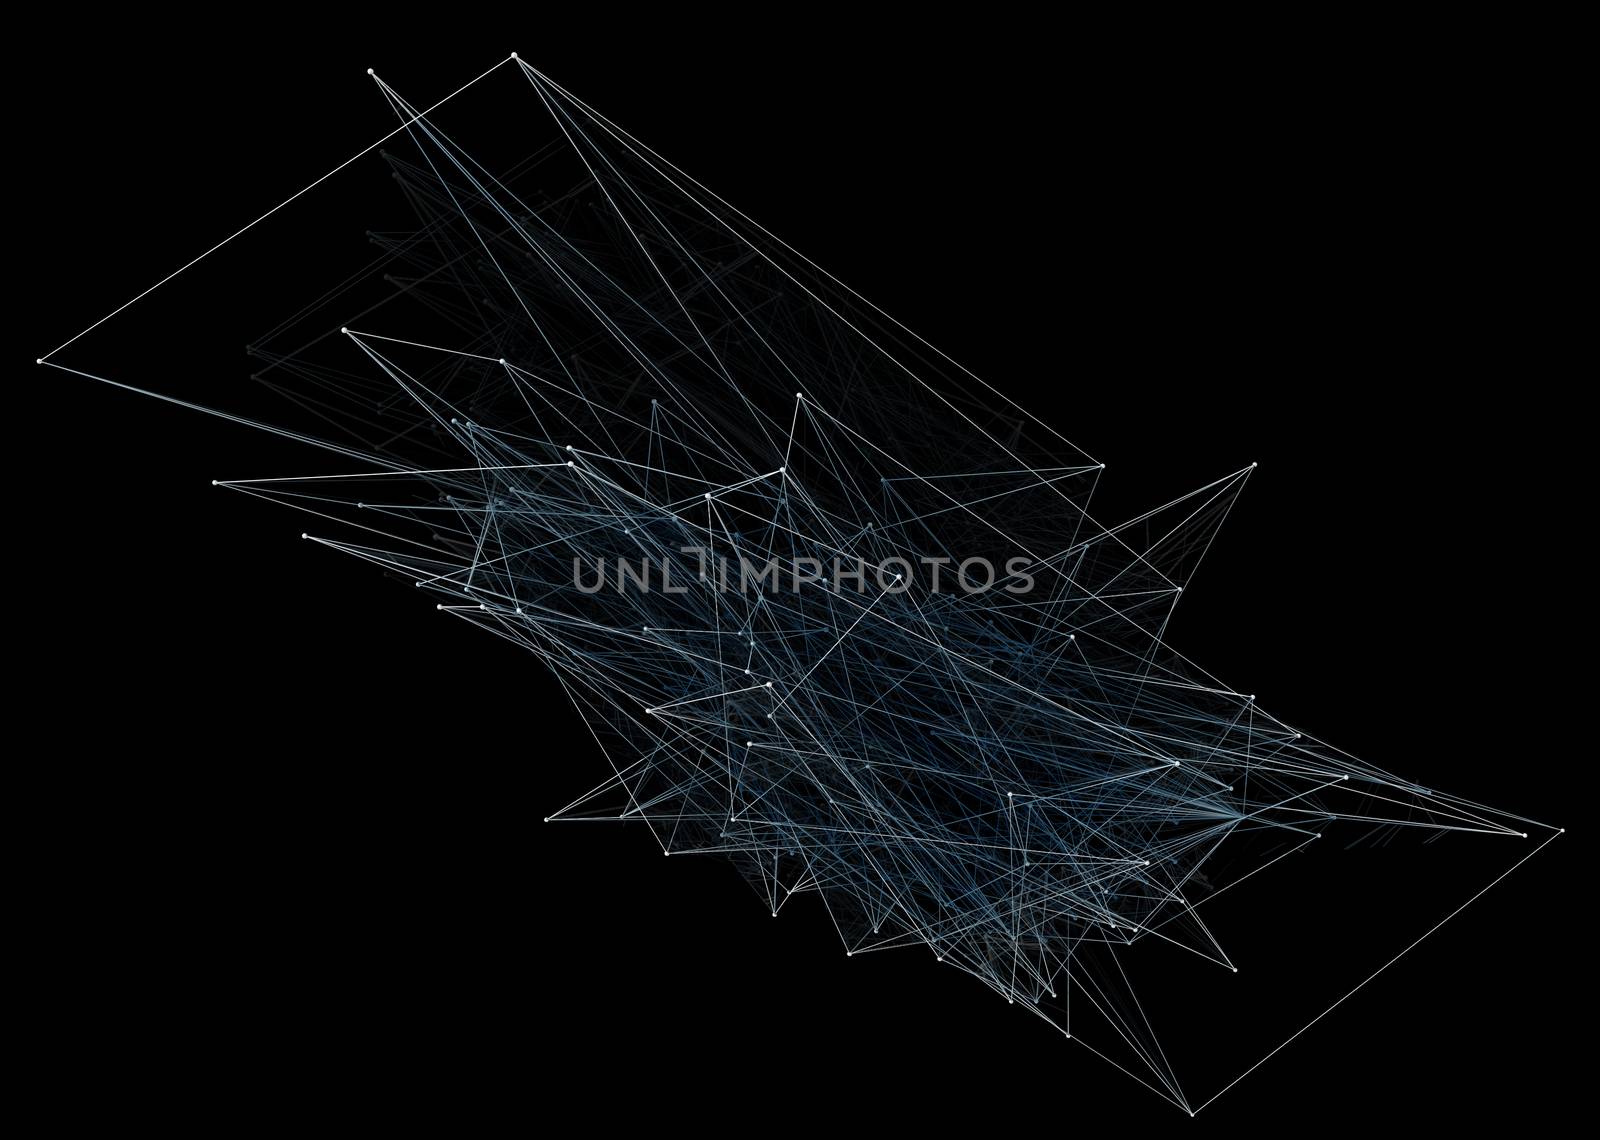 Abstract network connection on black background. 3D illustration